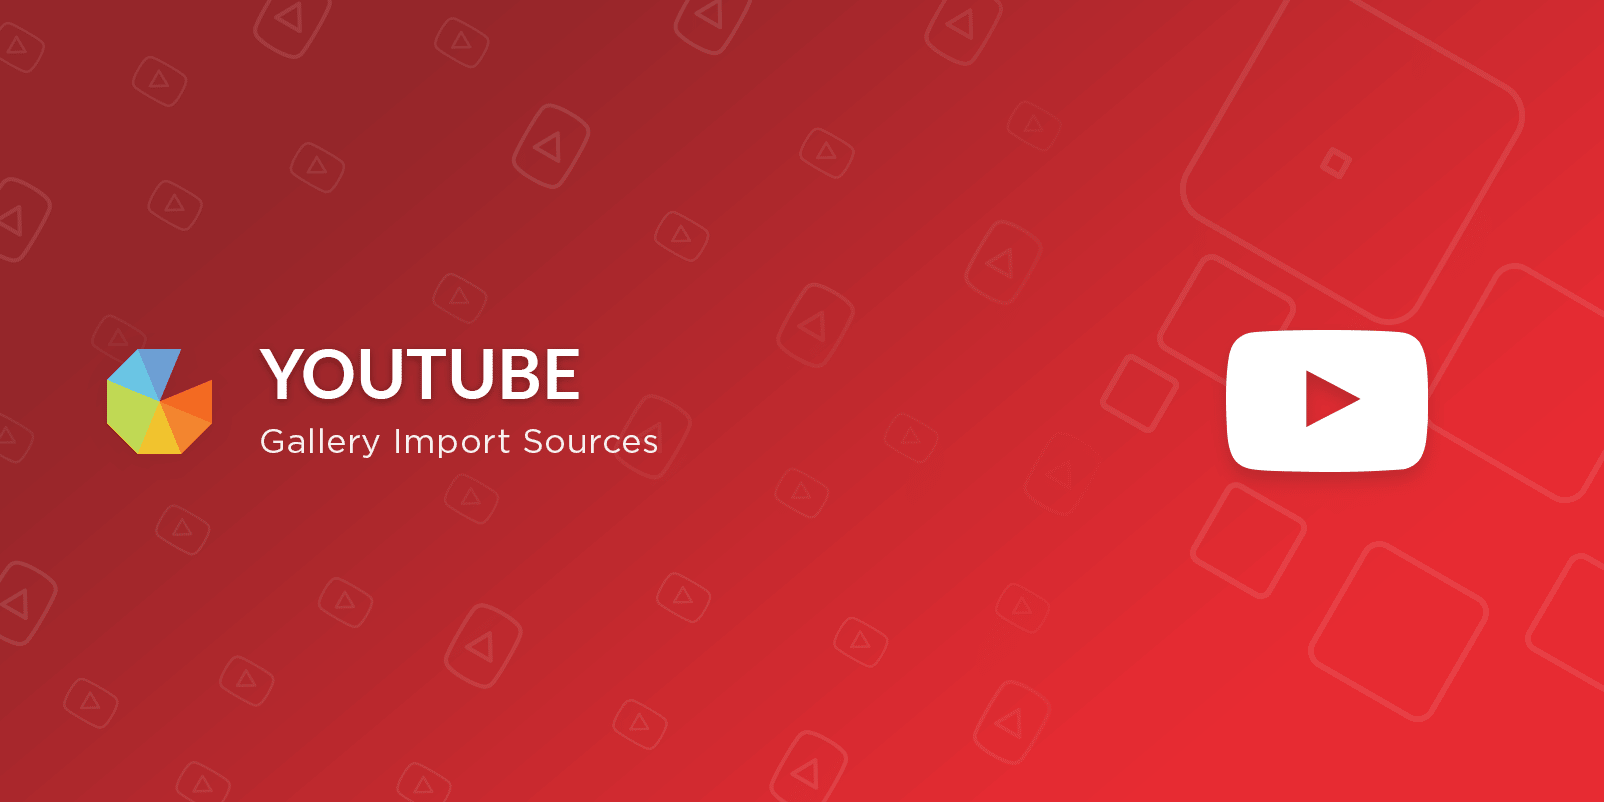 YouTube Gallery Import Sources for Gleam